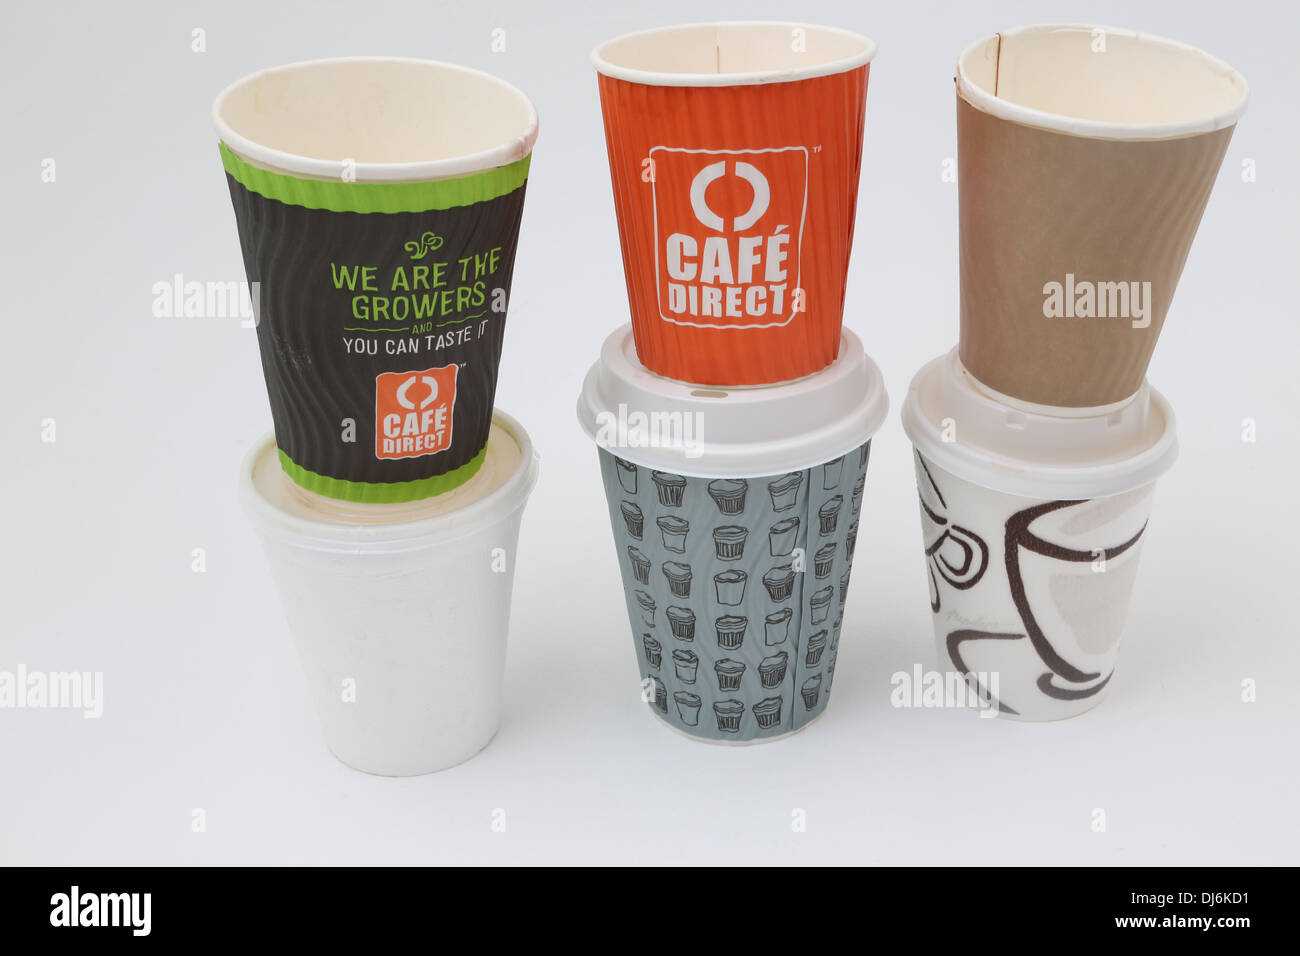 https://c8.alamy.com/comp/DJ6KD1/a-collection-of-paper-cups-and-a-polystyrene-cup-DJ6KD1.jpg